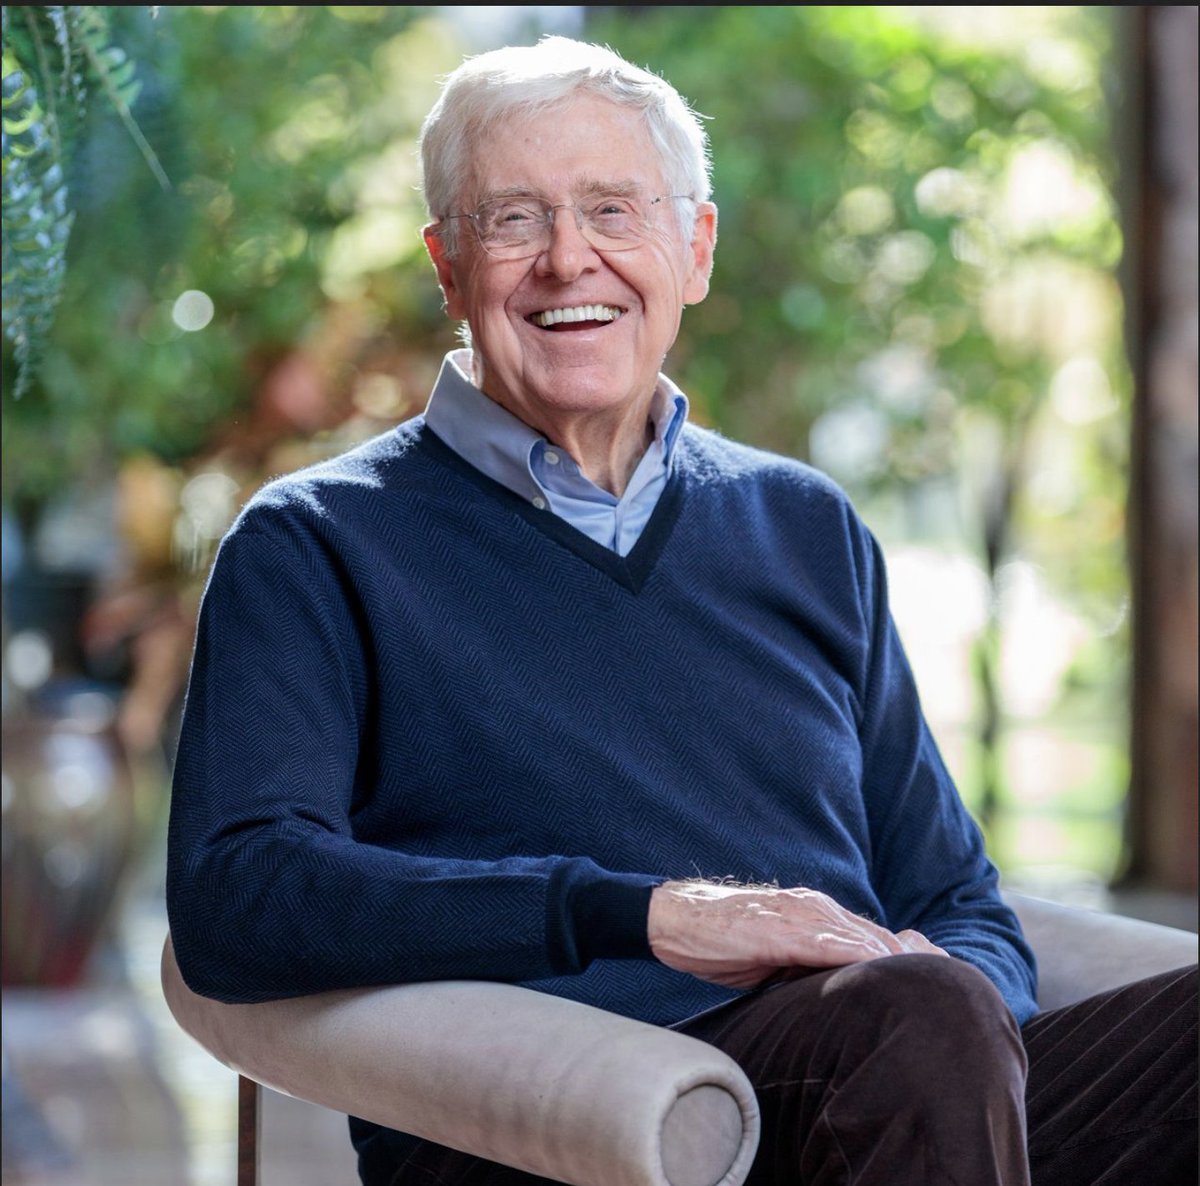 This is Charles Koch

Remember the face and name.Dont be fooled. He is an enemy of the people 

#gregPalast
#KochIndustries